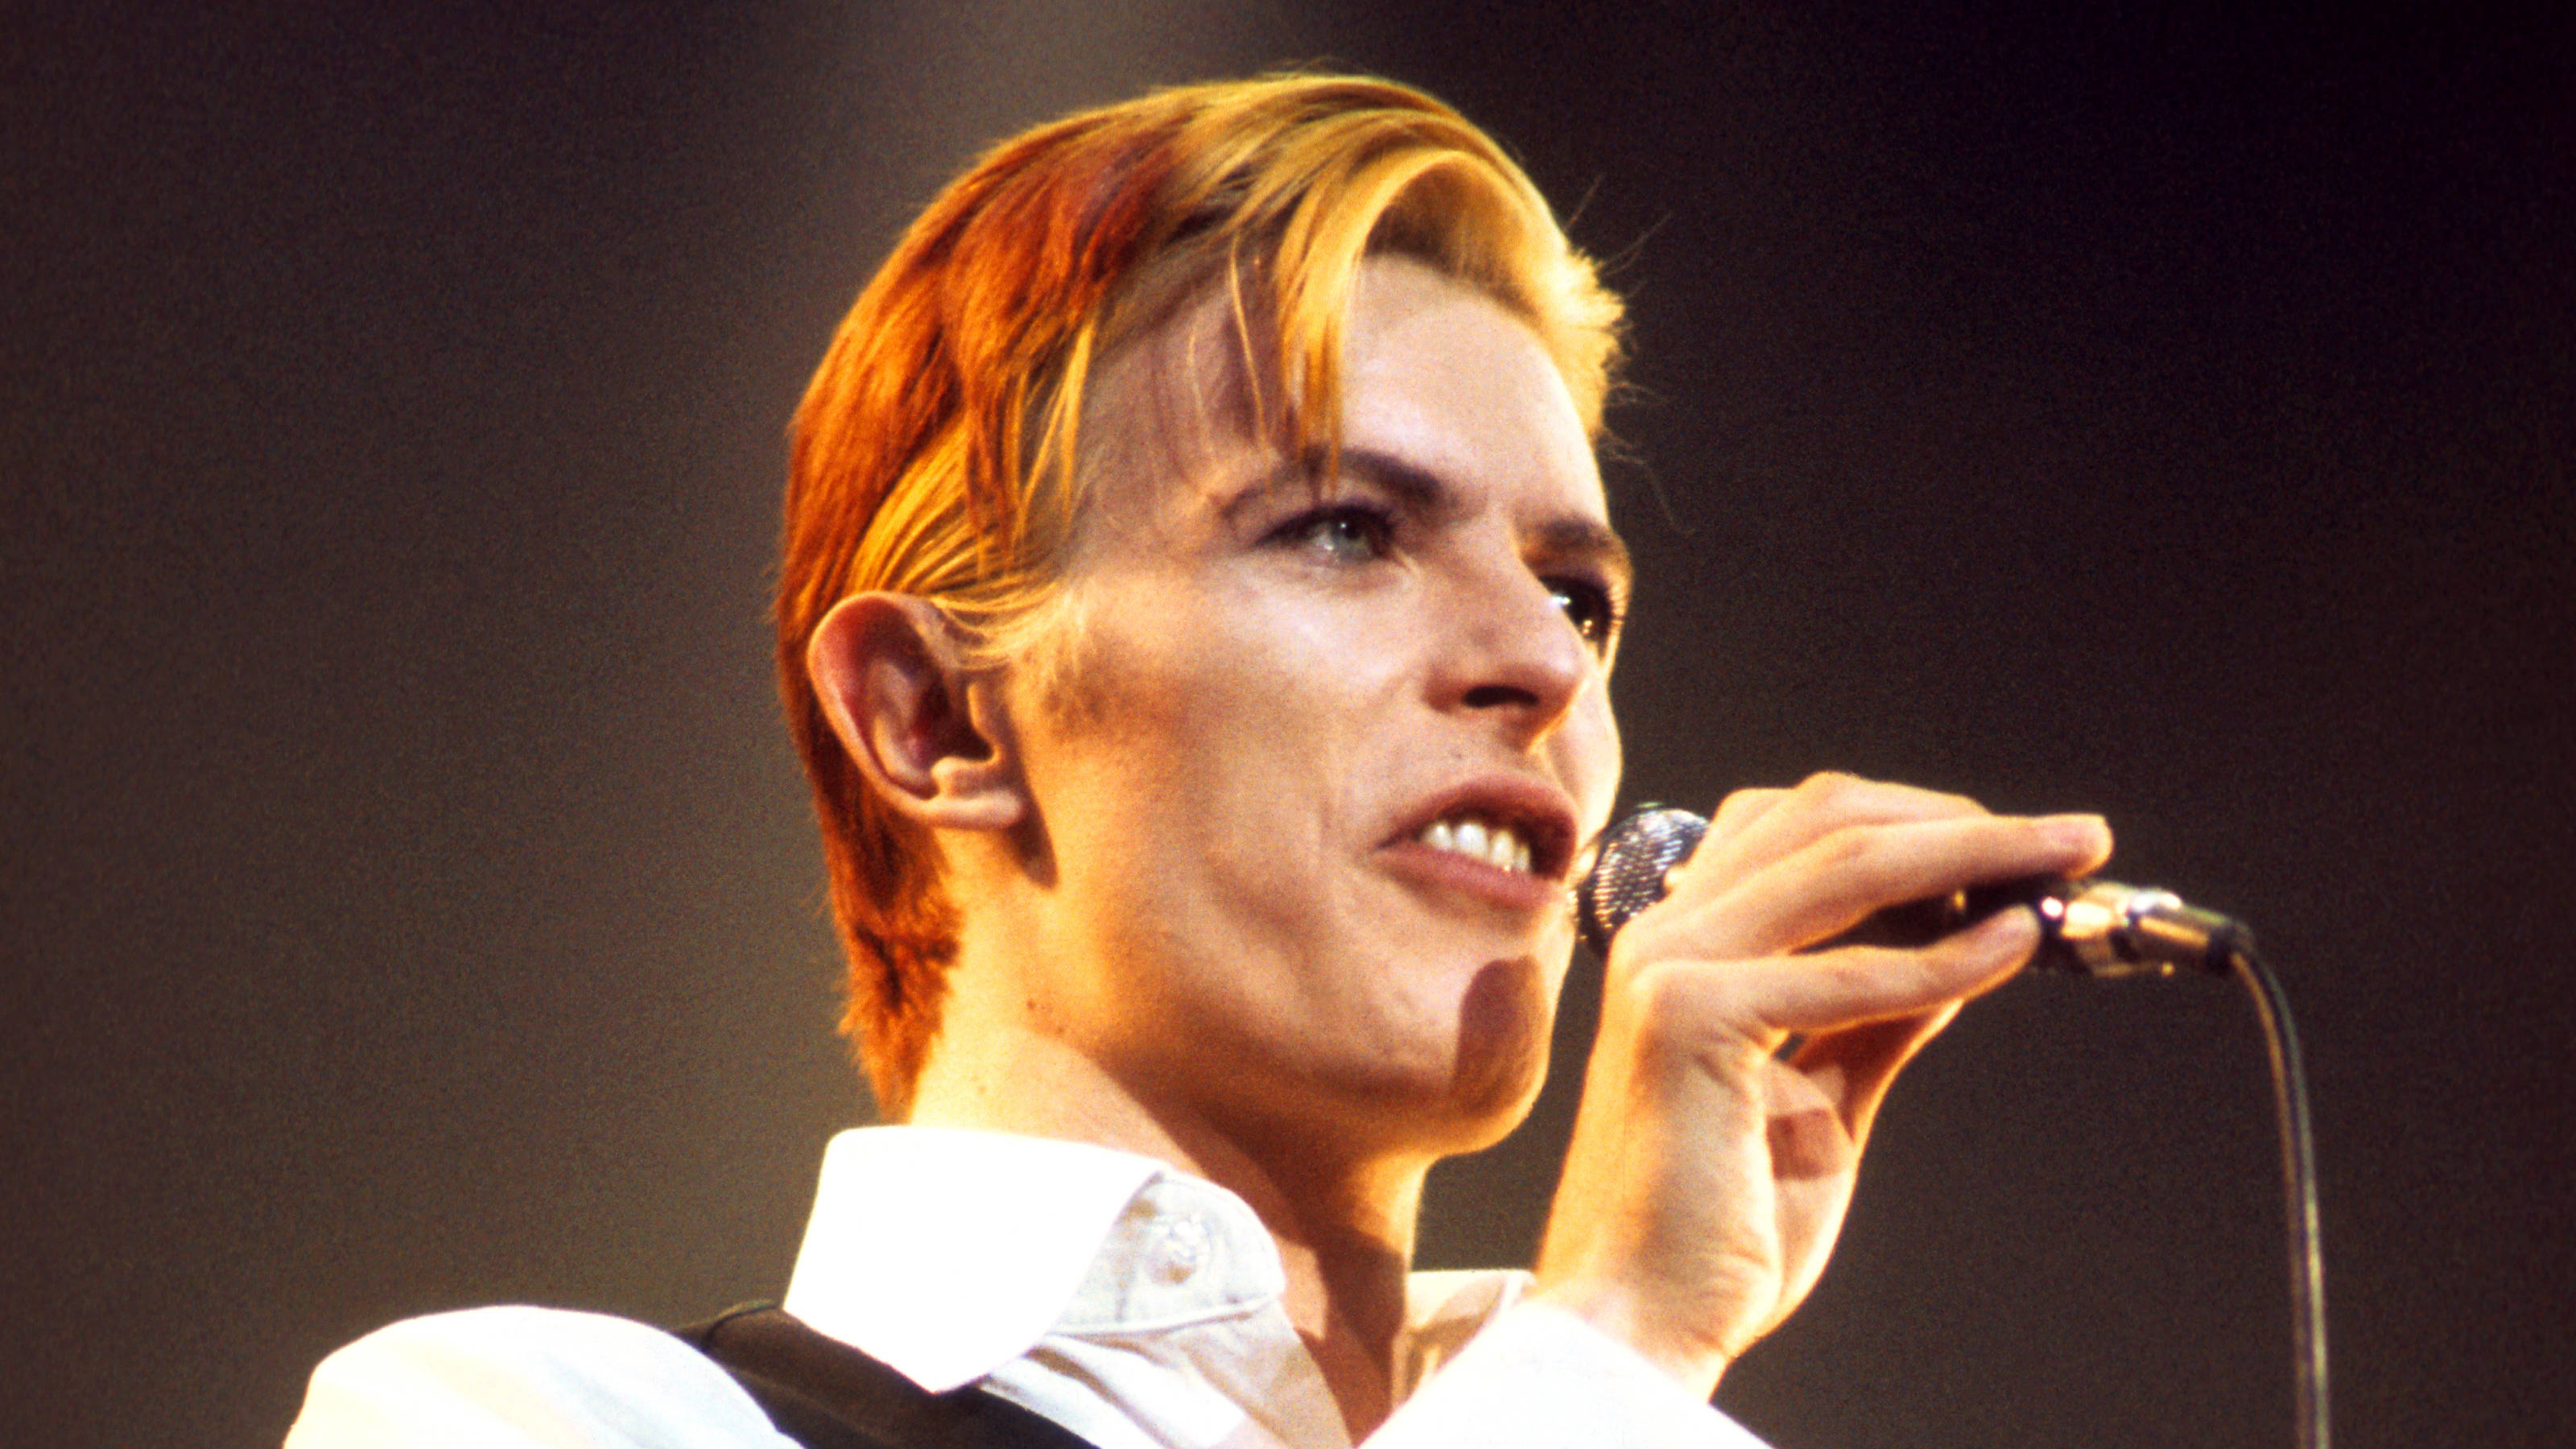 David Bowie's 20 greatest ever songs, ranked - Smooth